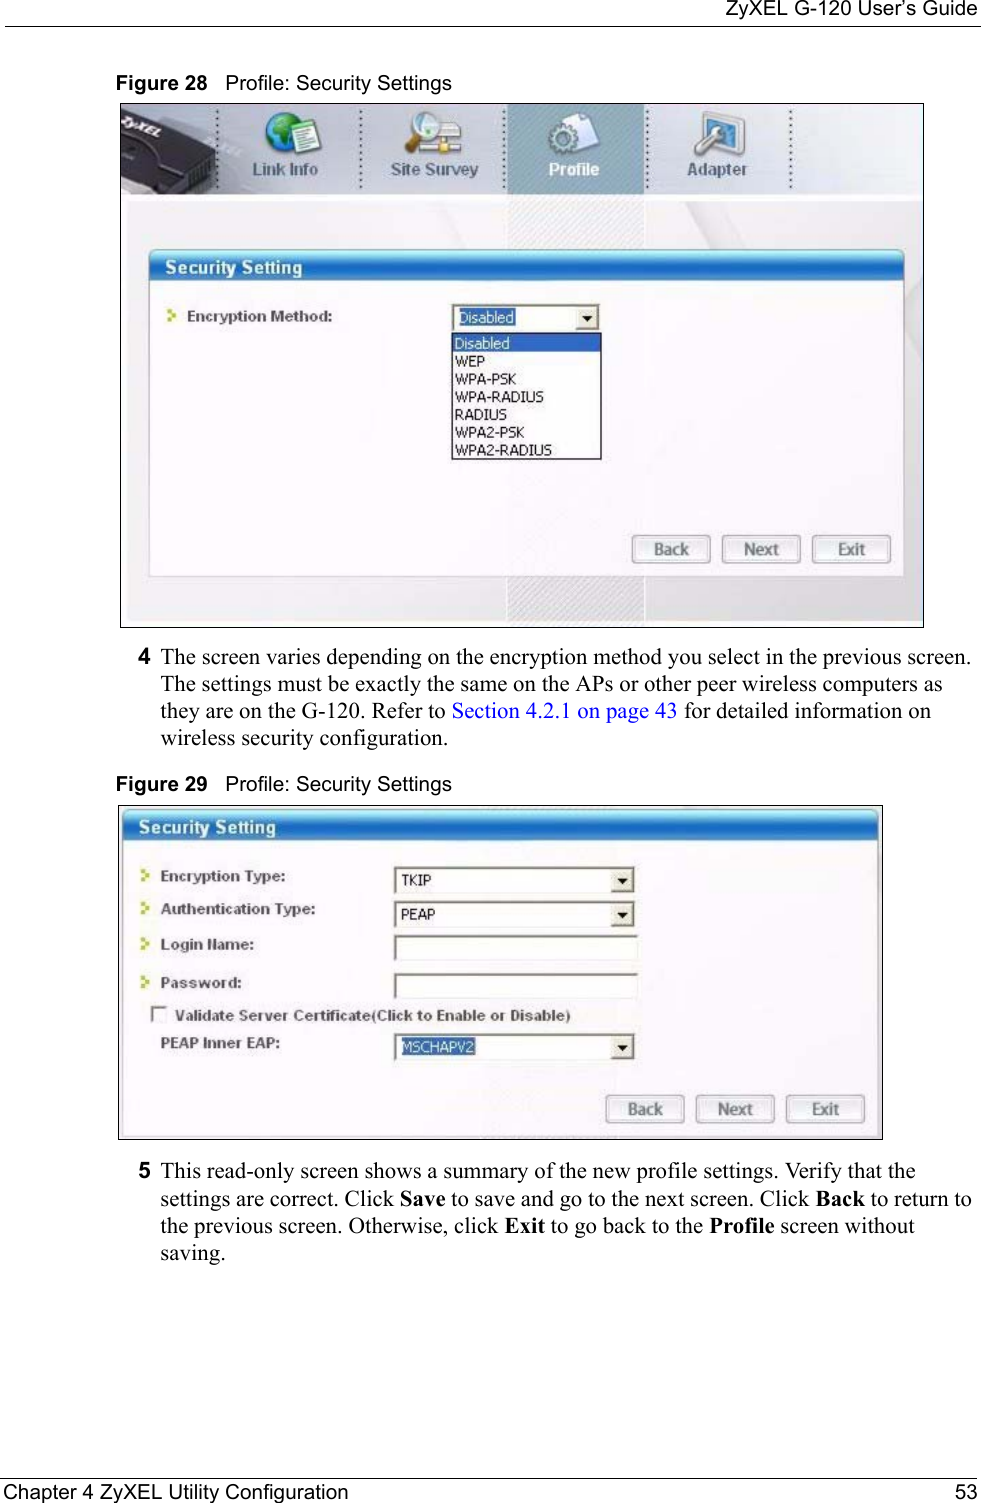 ZyXEL G-120 User’s GuideChapter 4 ZyXEL Utility Configuration 53Figure 28   Profile: Security Settings 4The screen varies depending on the encryption method you select in the previous screen. The settings must be exactly the same on the APs or other peer wireless computers as they are on the G-120. Refer to Section 4.2.1 on page 43 for detailed information on wireless security configuration.Figure 29   Profile: Security Settings 5This read-only screen shows a summary of the new profile settings. Verify that the settings are correct. Click Save to save and go to the next screen. Click Back to return to the previous screen. Otherwise, click Exit to go back to the Profile screen without saving.